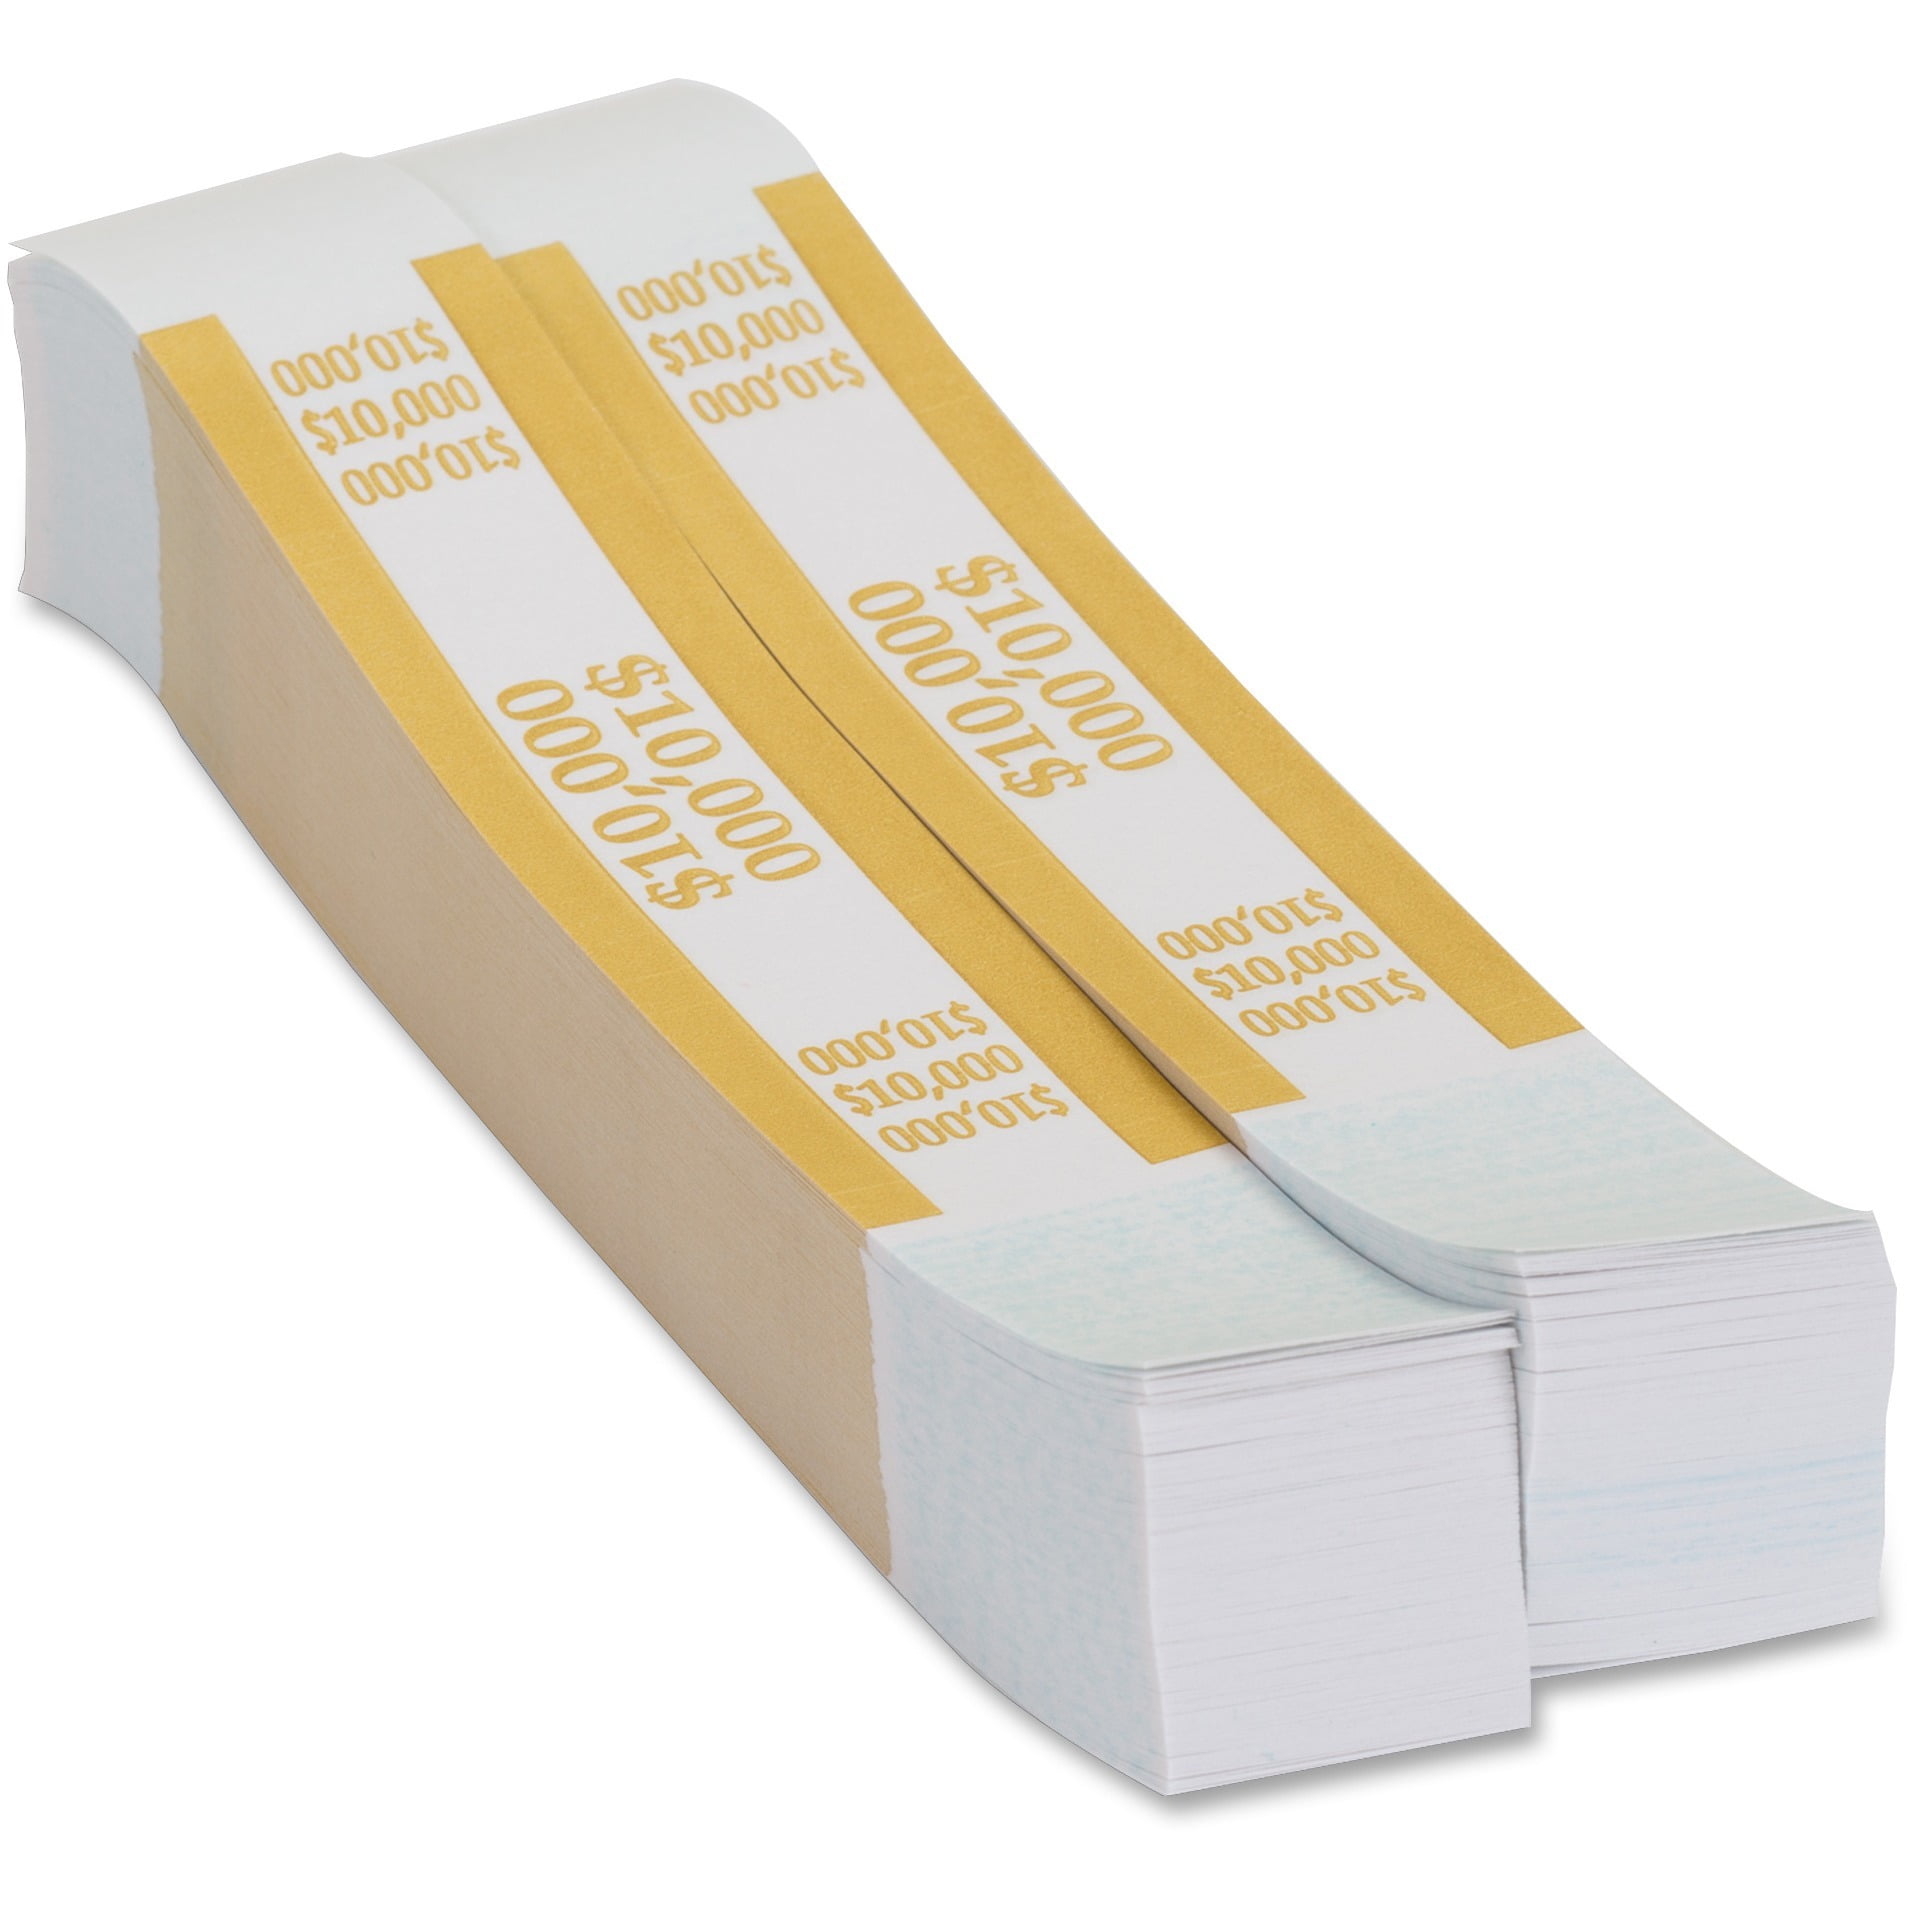 pap-r-pqp410000-currency-straps-1000-pack-white-yellow-walmart